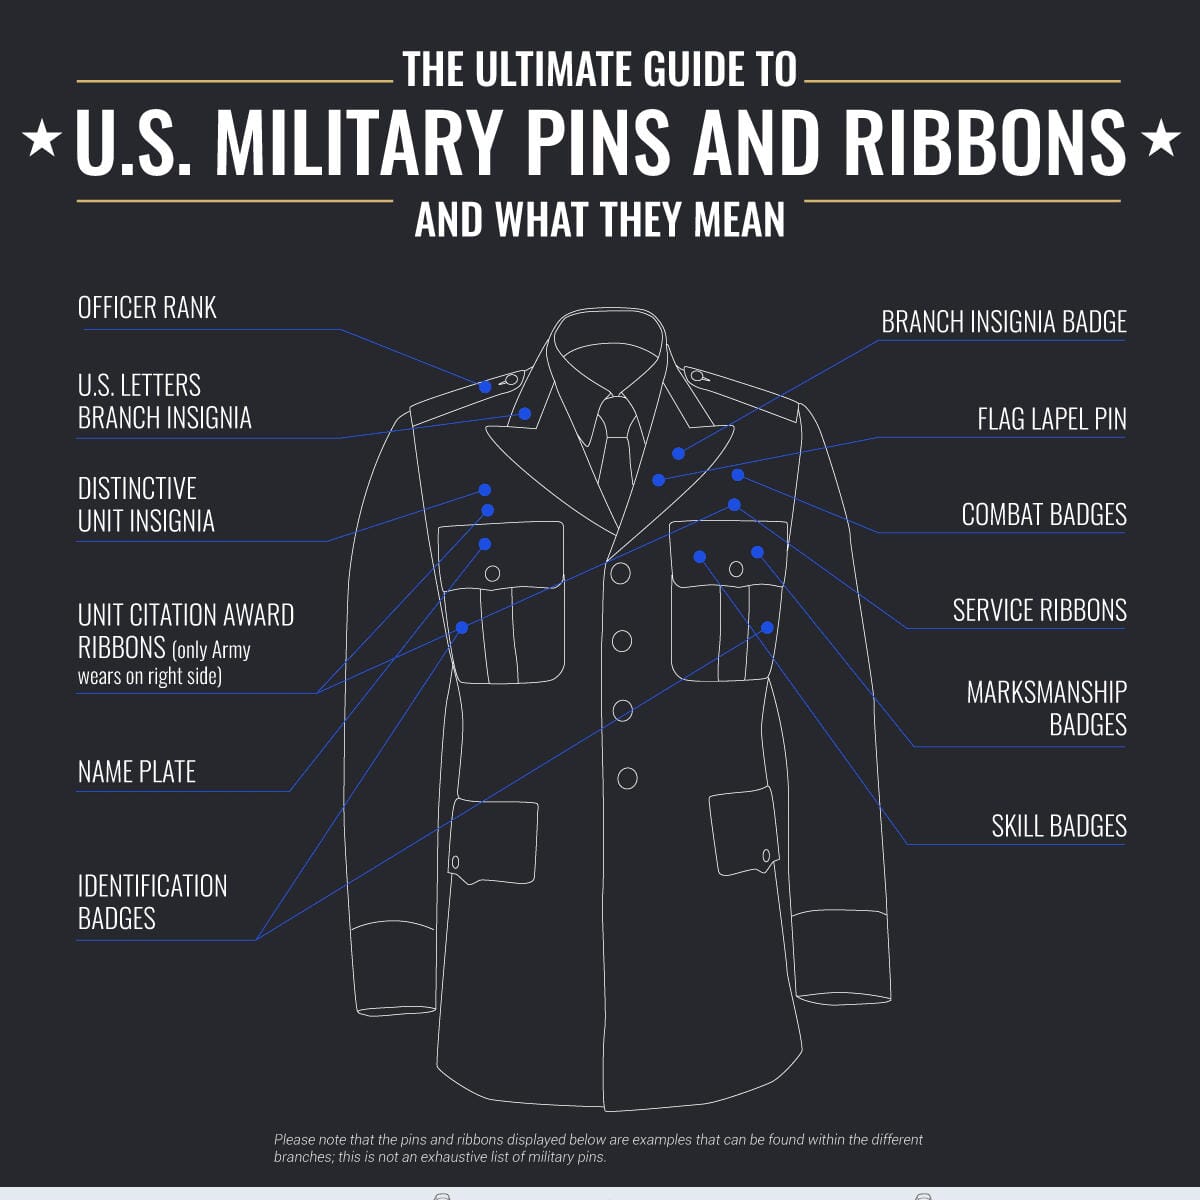 The Ultimate Guide to U.S. Military Pins and Ribbons and What They Mea